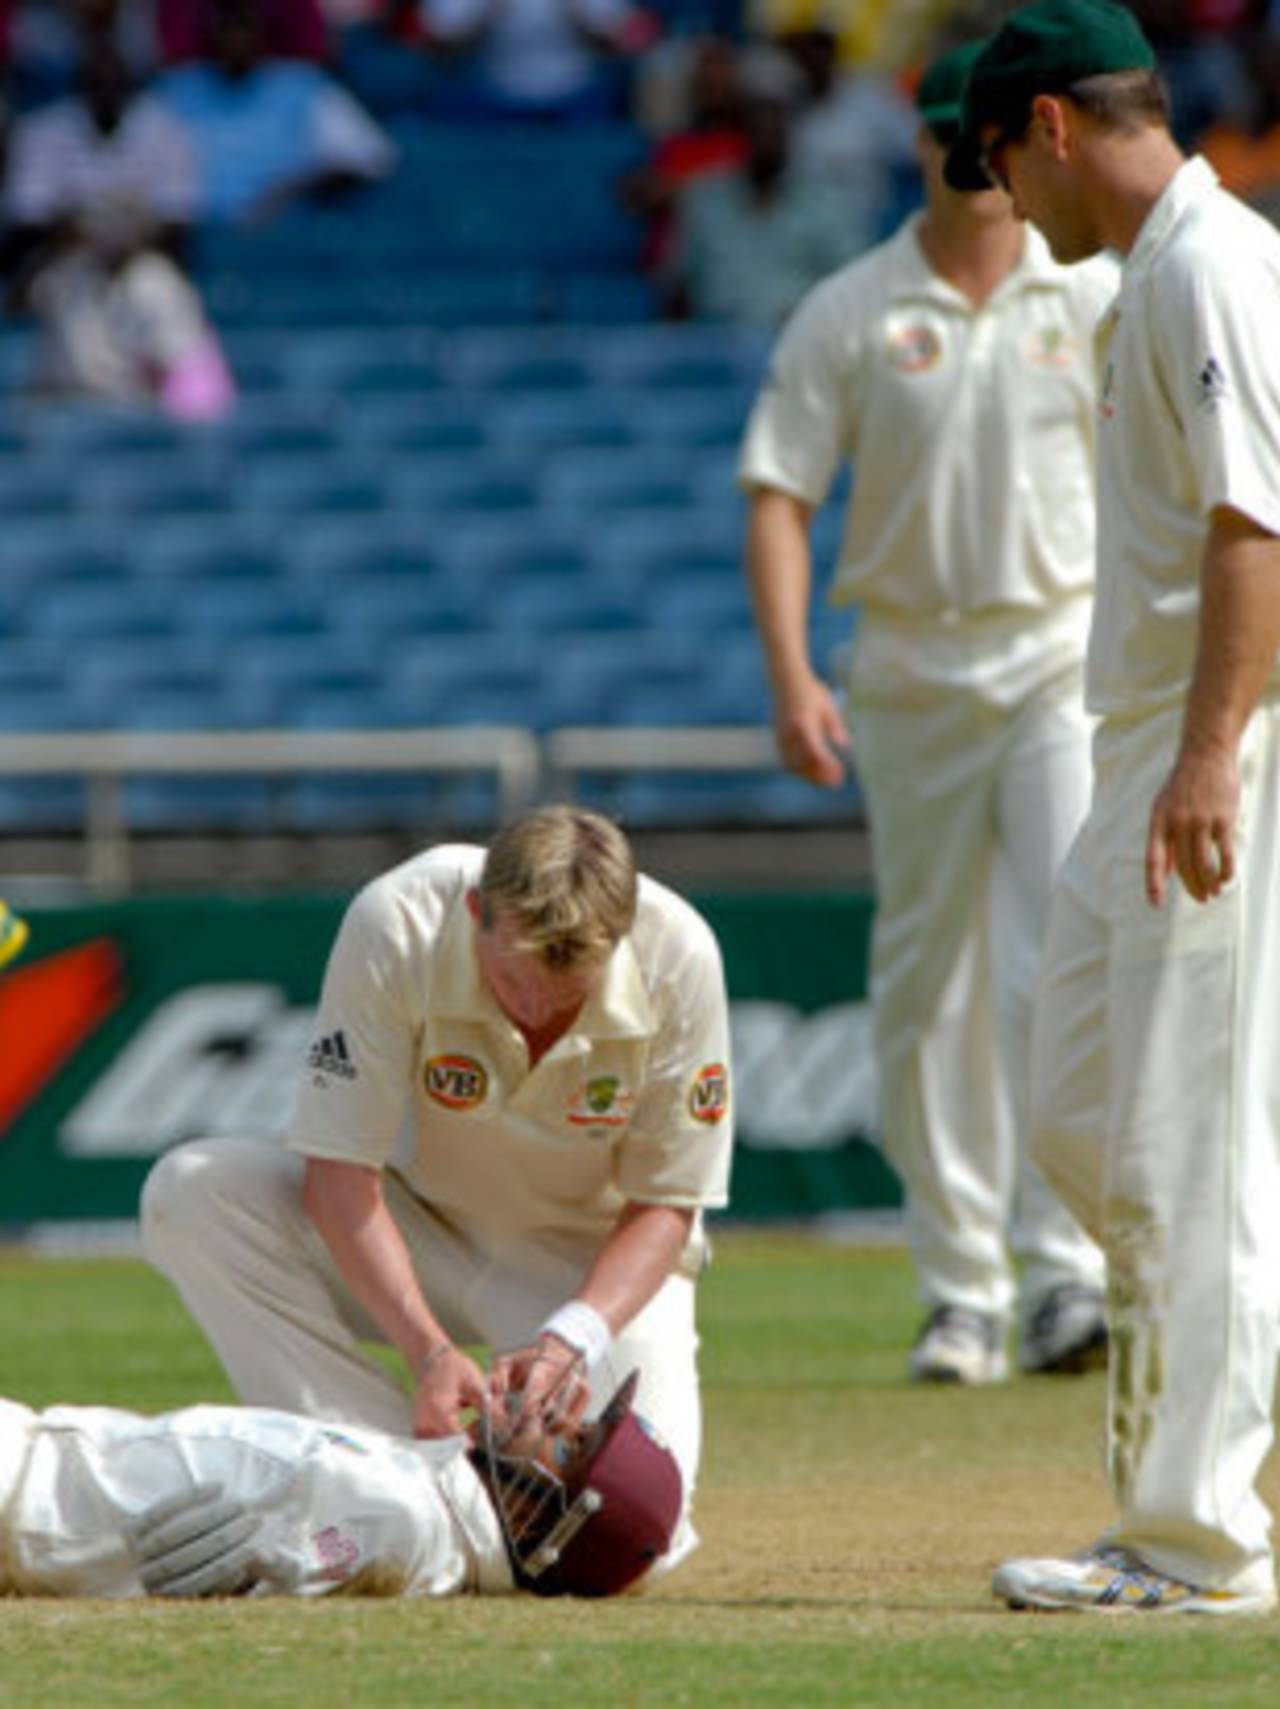 Brett Lee checks on Shivnarine Chanderpaul after knocking him down with a bouncer, West Indies v Australia, 1st Test, Jamaica, 3rd day, May 24, 2008